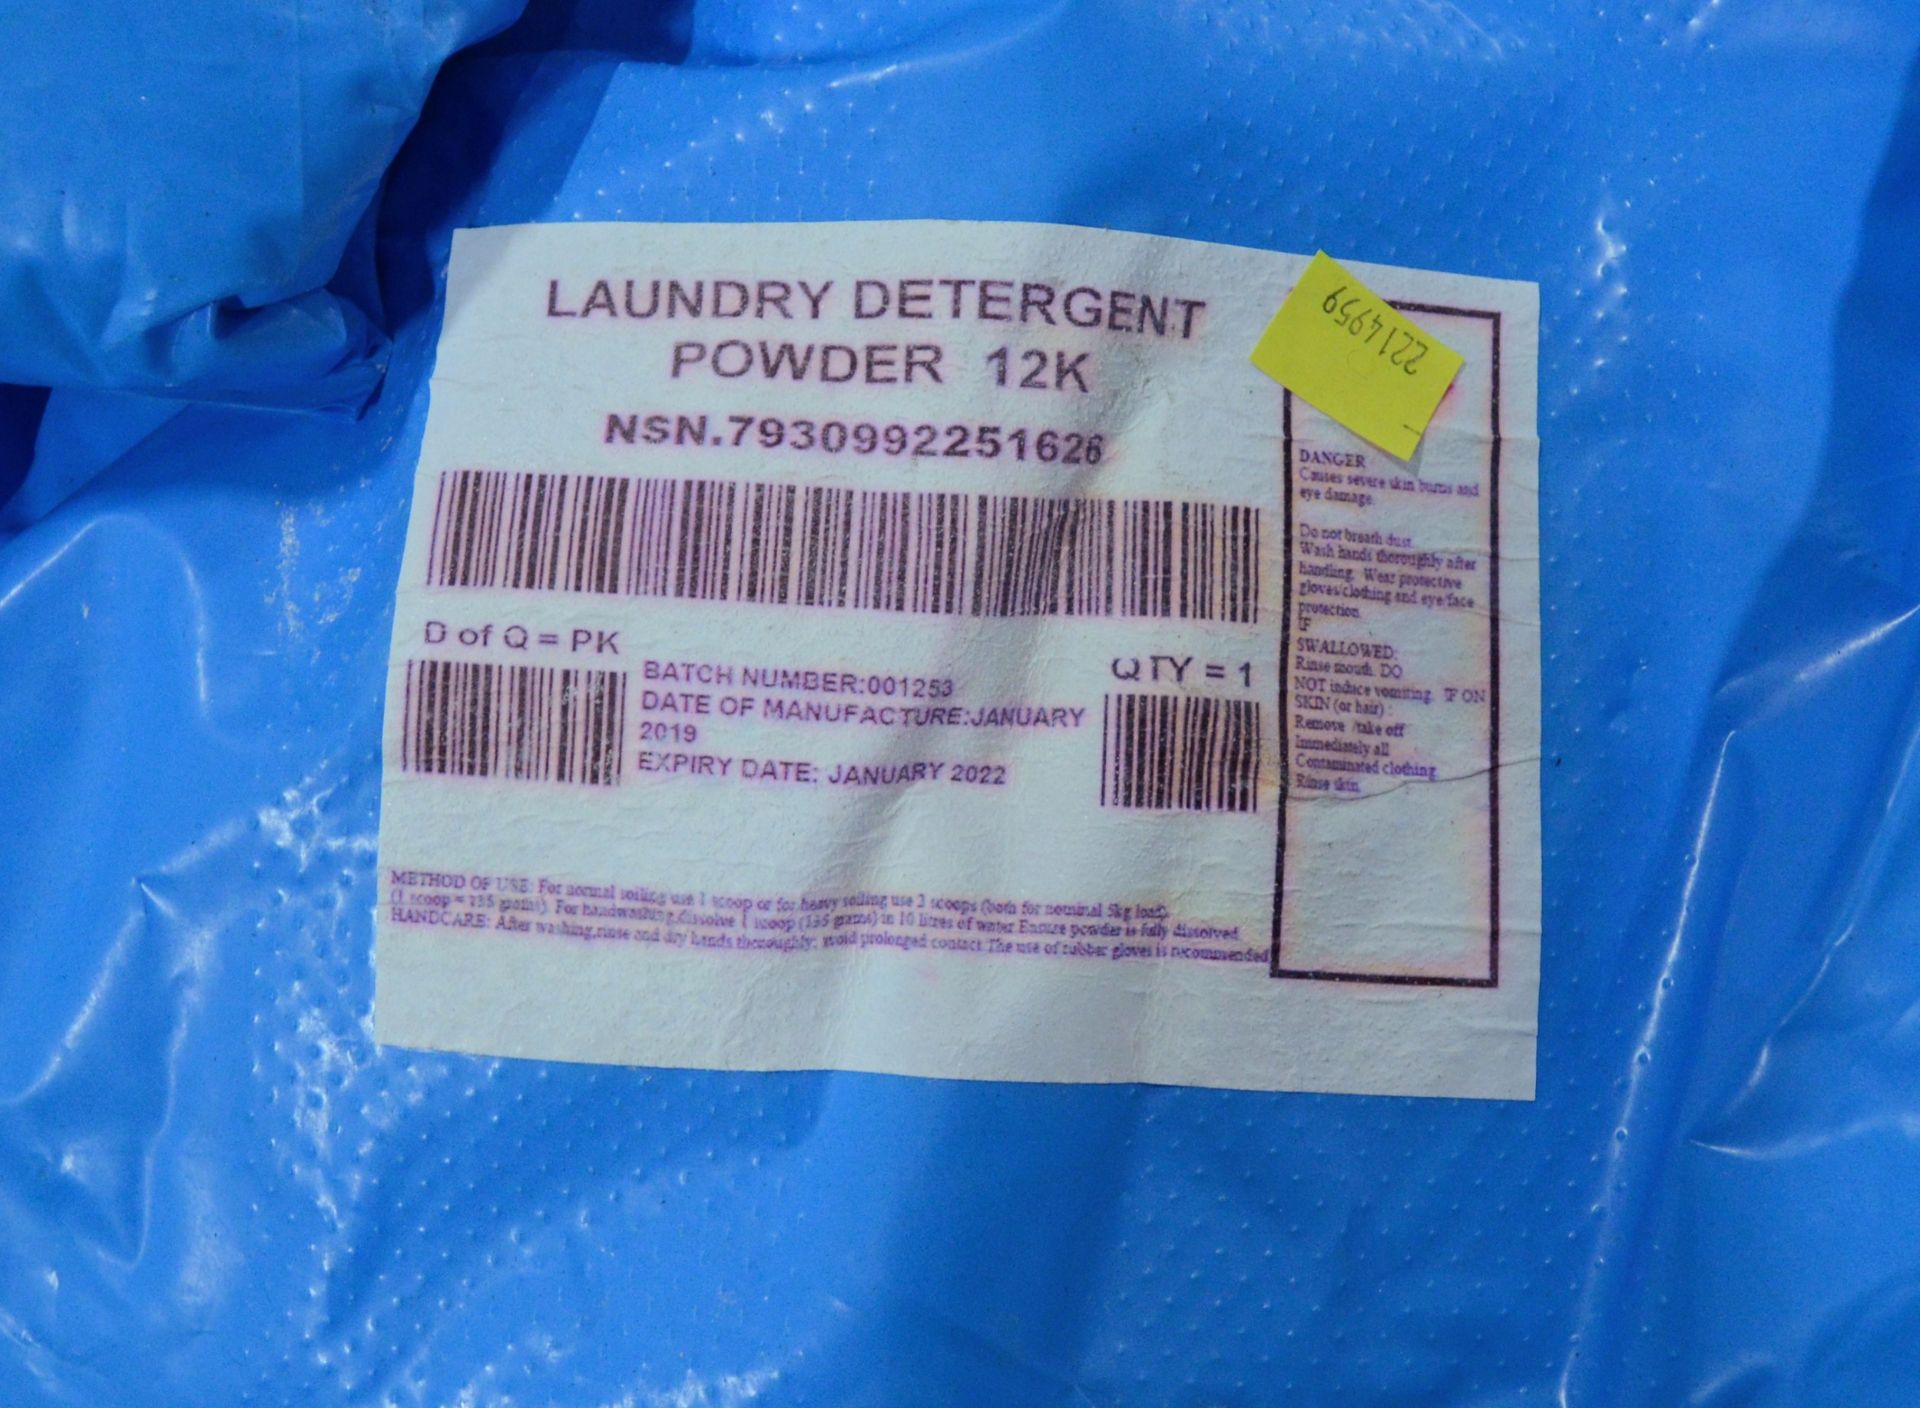 20x Laundry Detergent Powder 12K Packets - Image 2 of 3